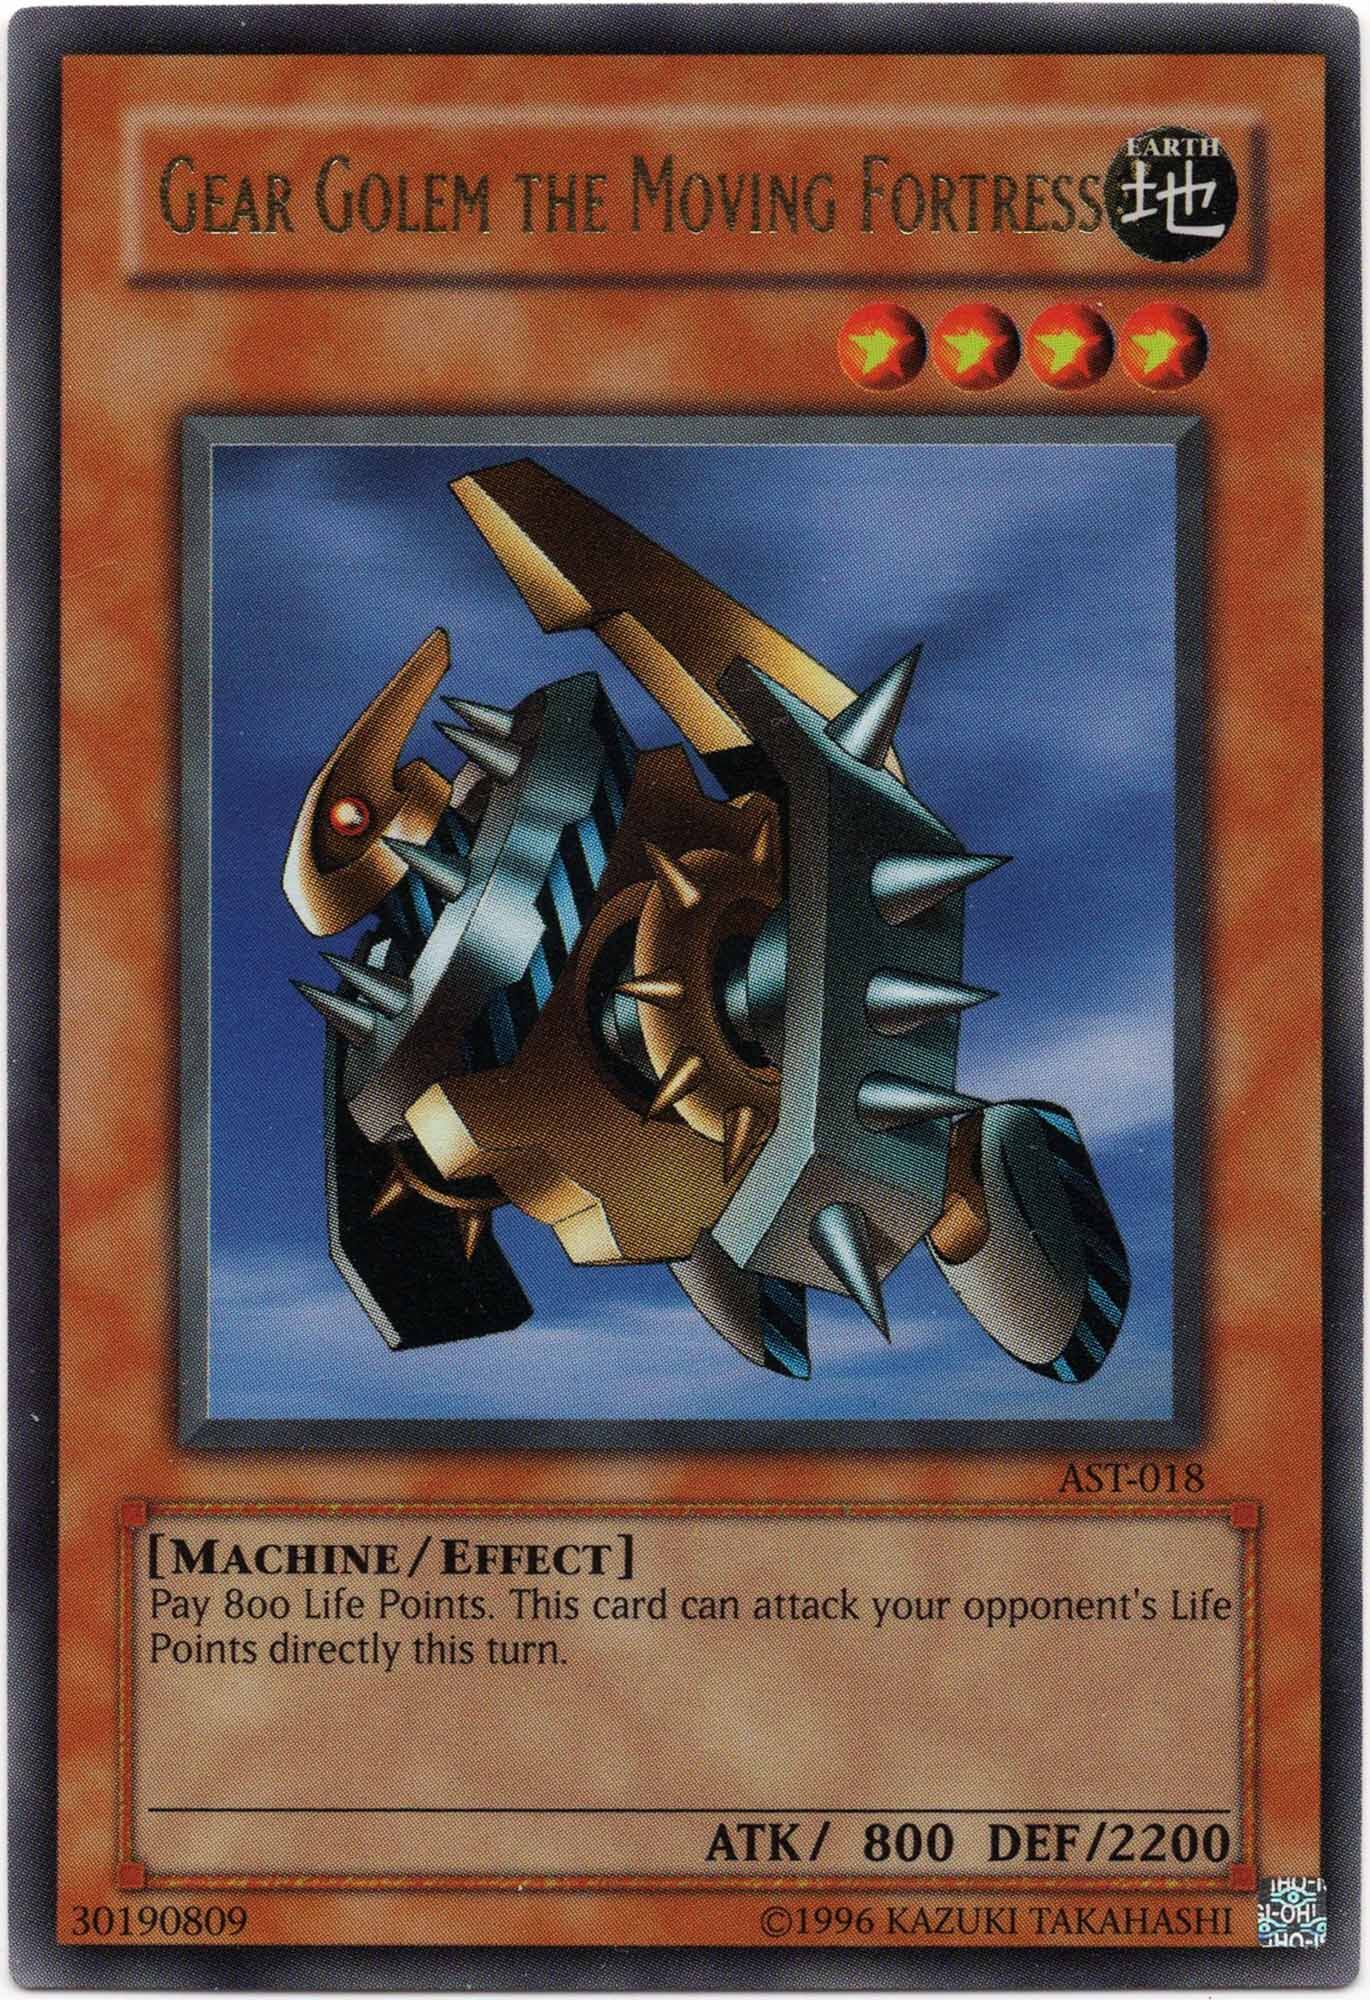 Gear Golem the Moving Fortress - AST-018 - Ultra Rare (Lightly Played)